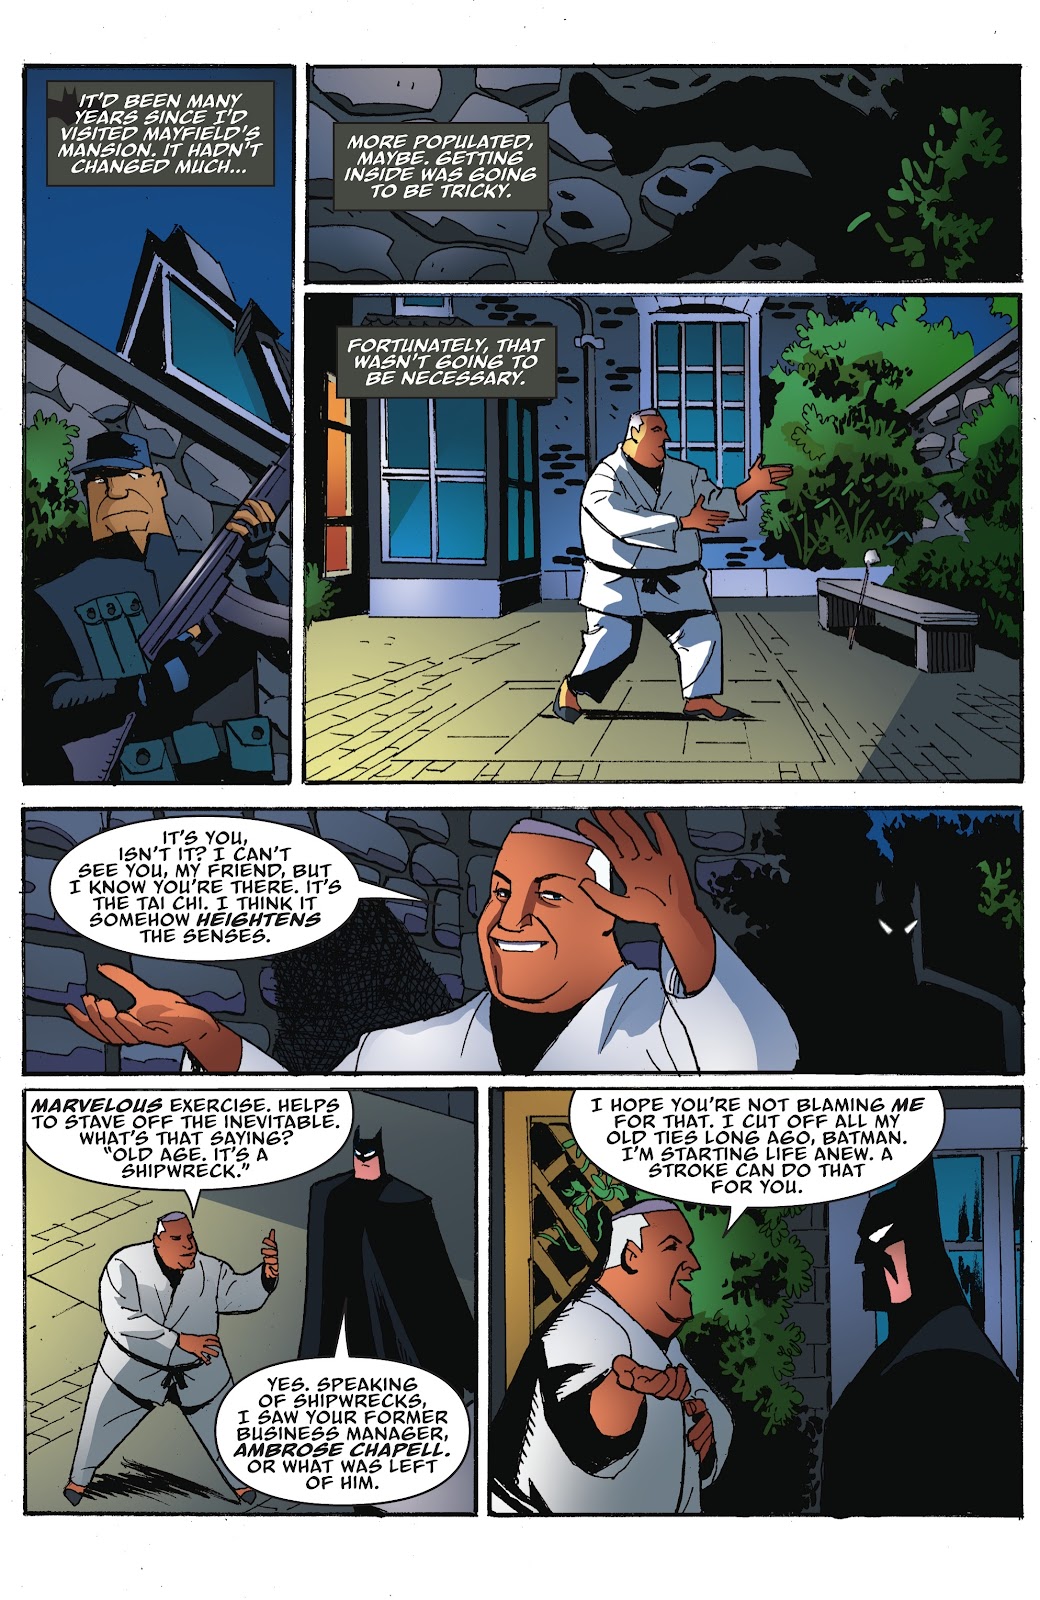 Batman: The Adventures Continue: Season Two issue 6 - Page 6